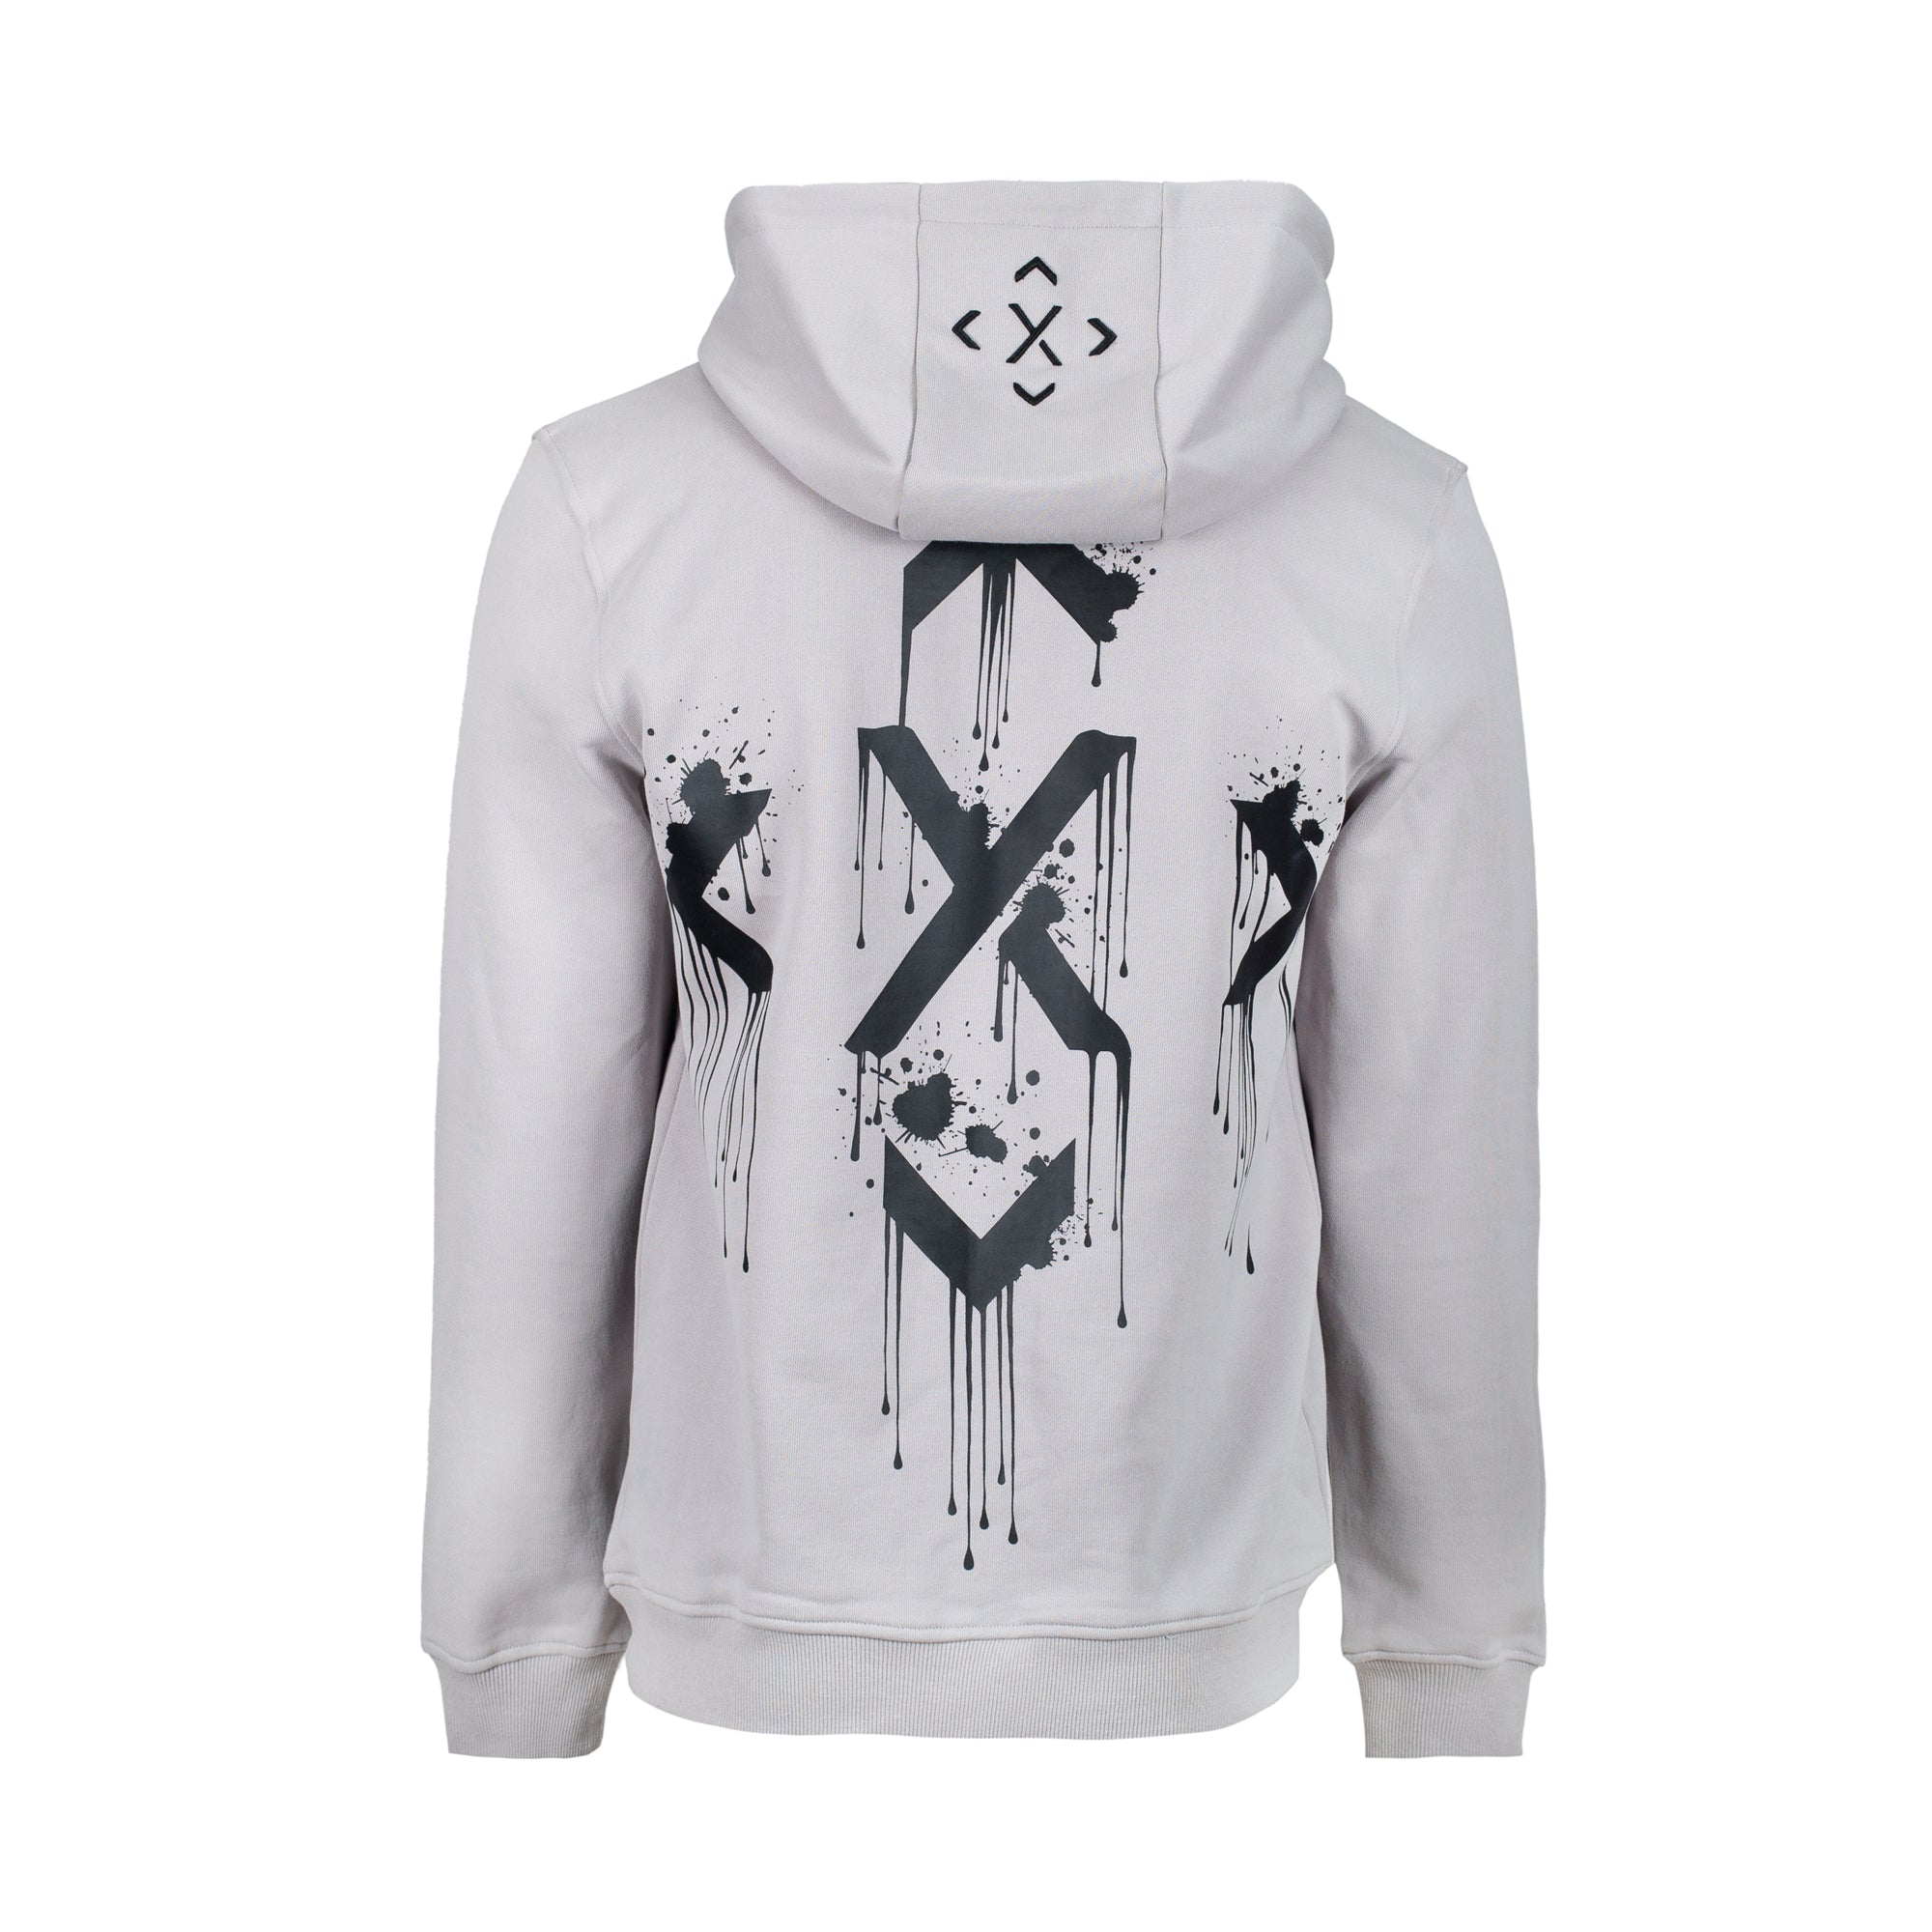 Graphic Print Hoodie - Grey - Explicit Clothing